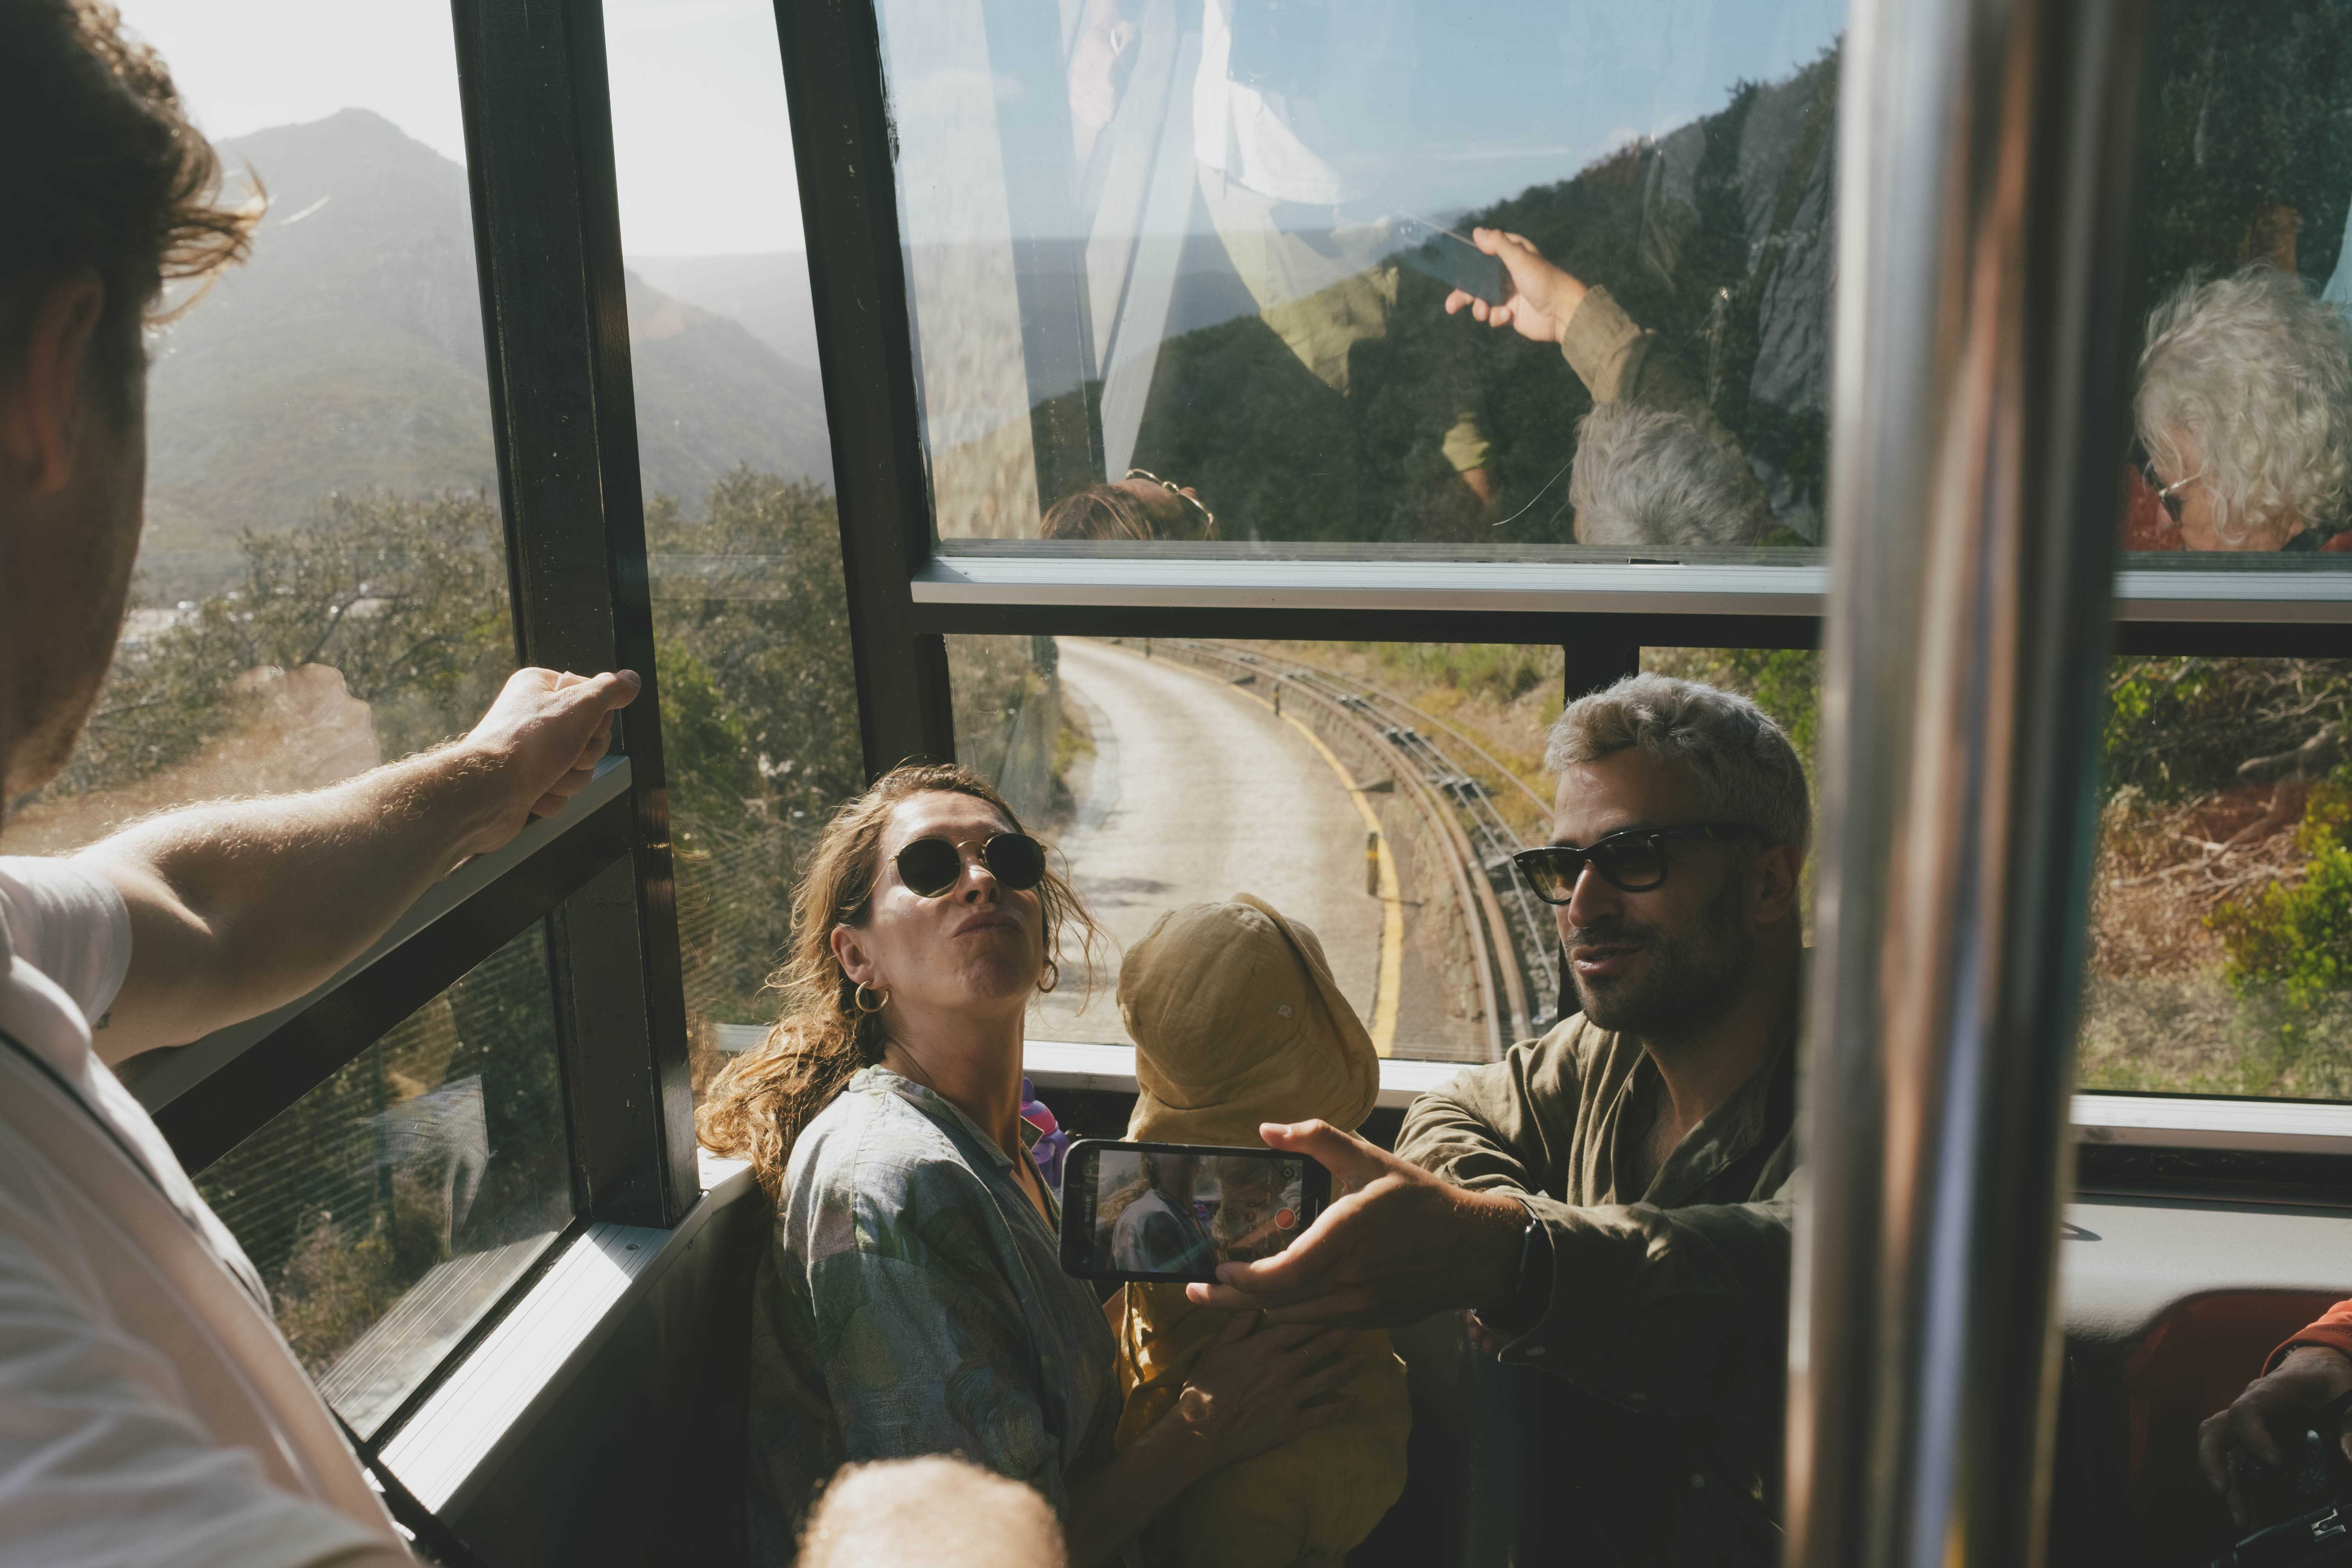 A family, husband, wife, and child, sitting in the front of a funicular posing for a selfie. Their reflections are in the glass.